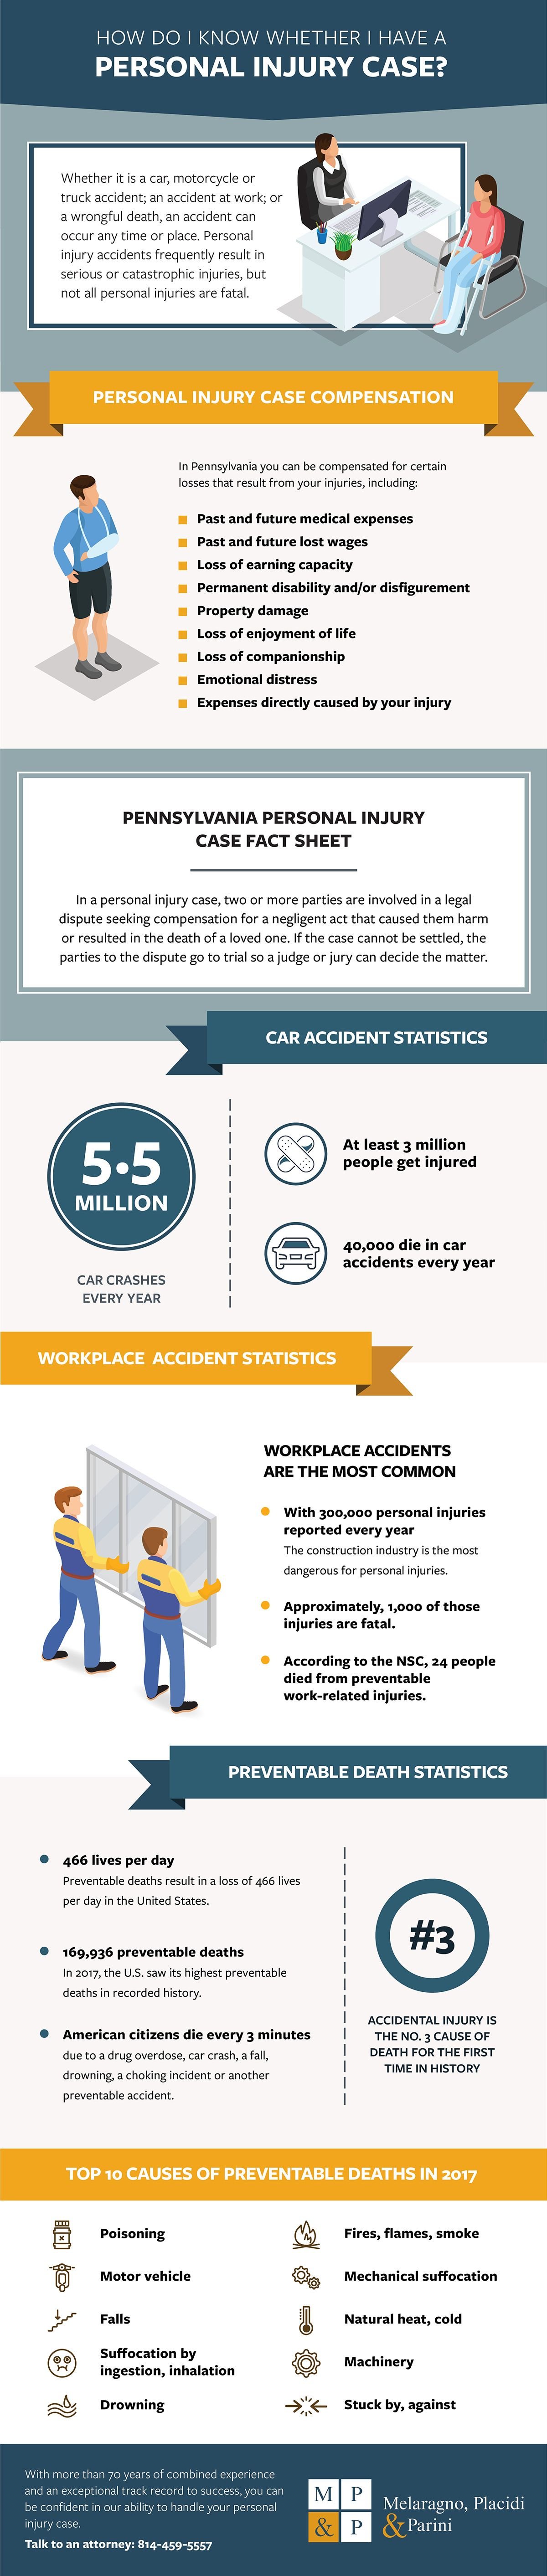 How do I know whether I have a personal injury case infographic